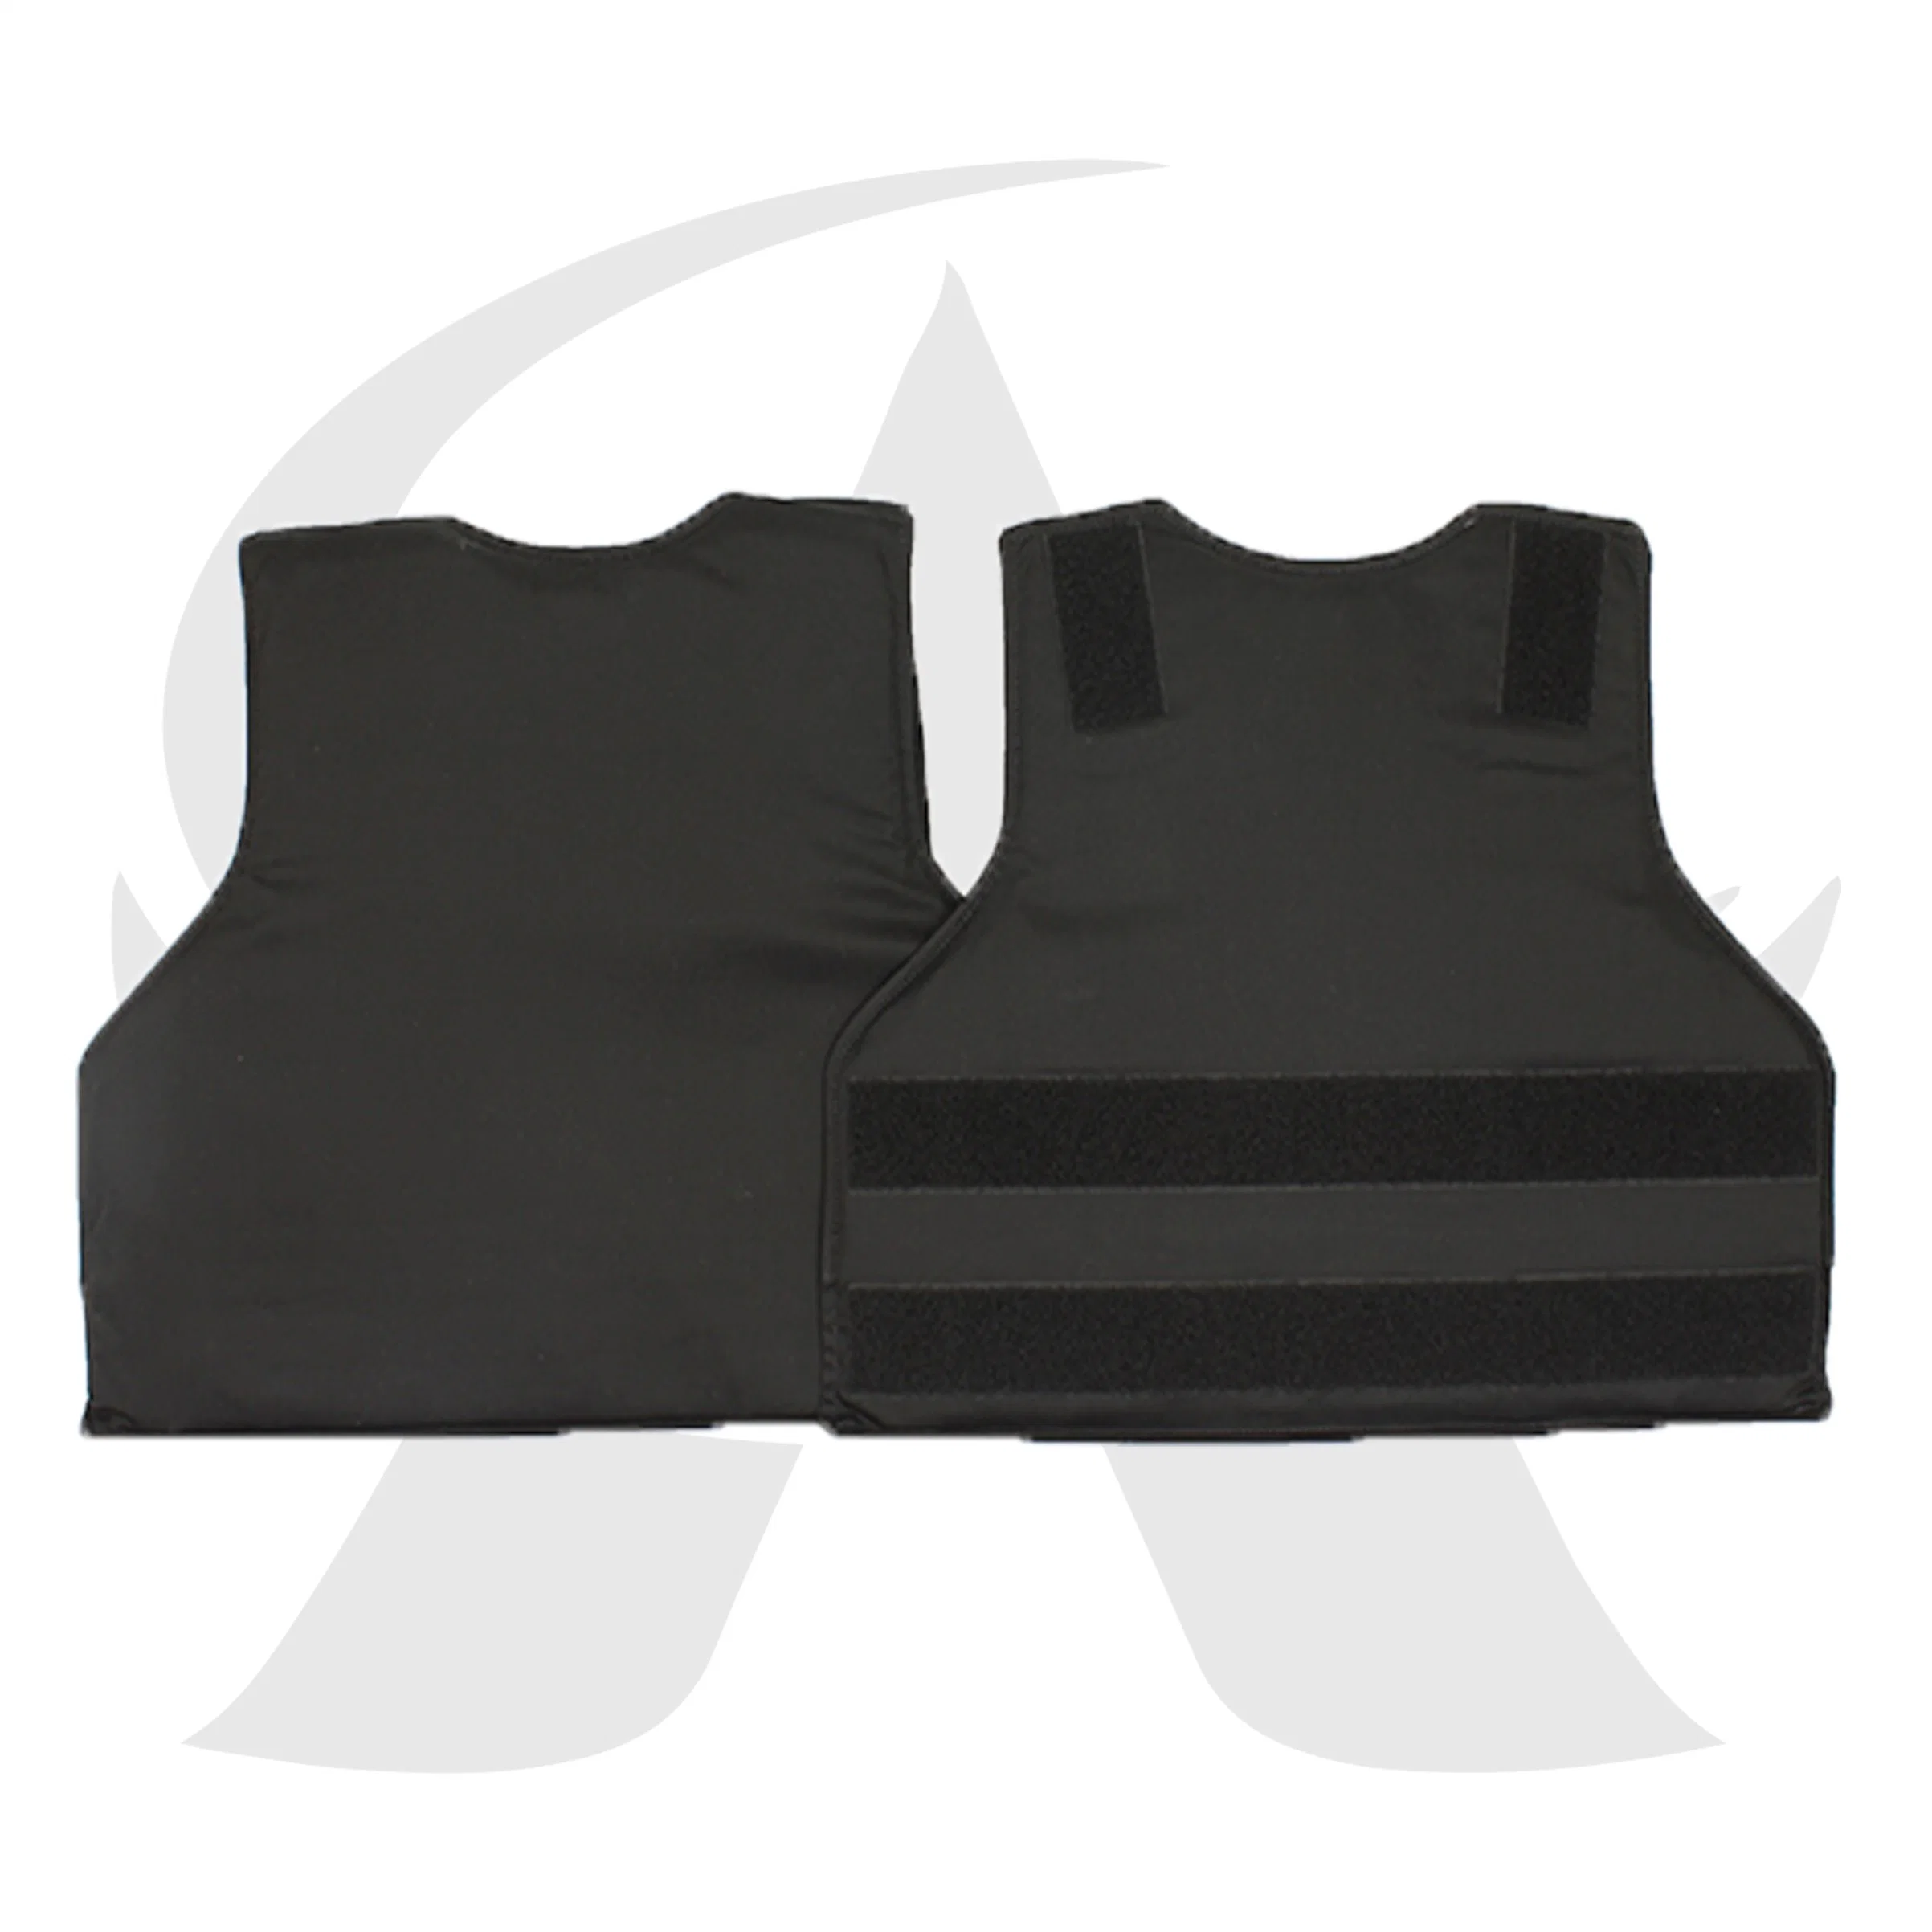 Nij Level III/IV Military Tactical Army Police Security Bullet Proof Vest